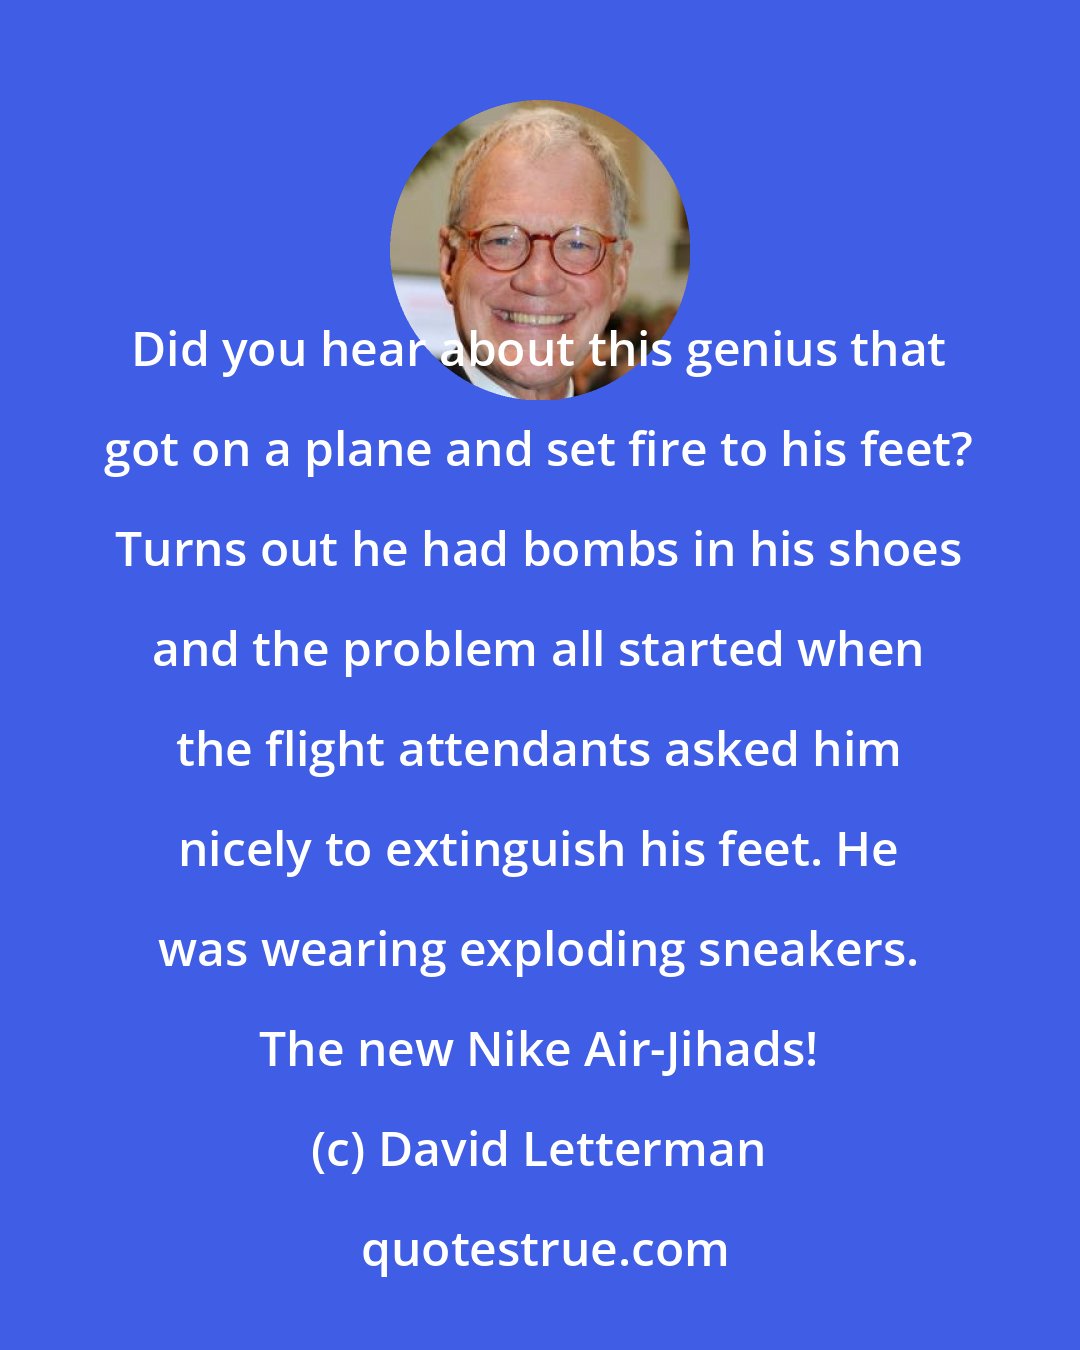 David Letterman: Did you hear about this genius that got on a plane and set fire to his feet? Turns out he had bombs in his shoes and the problem all started when the flight attendants asked him nicely to extinguish his feet. He was wearing exploding sneakers. The new Nike Air-Jihads!